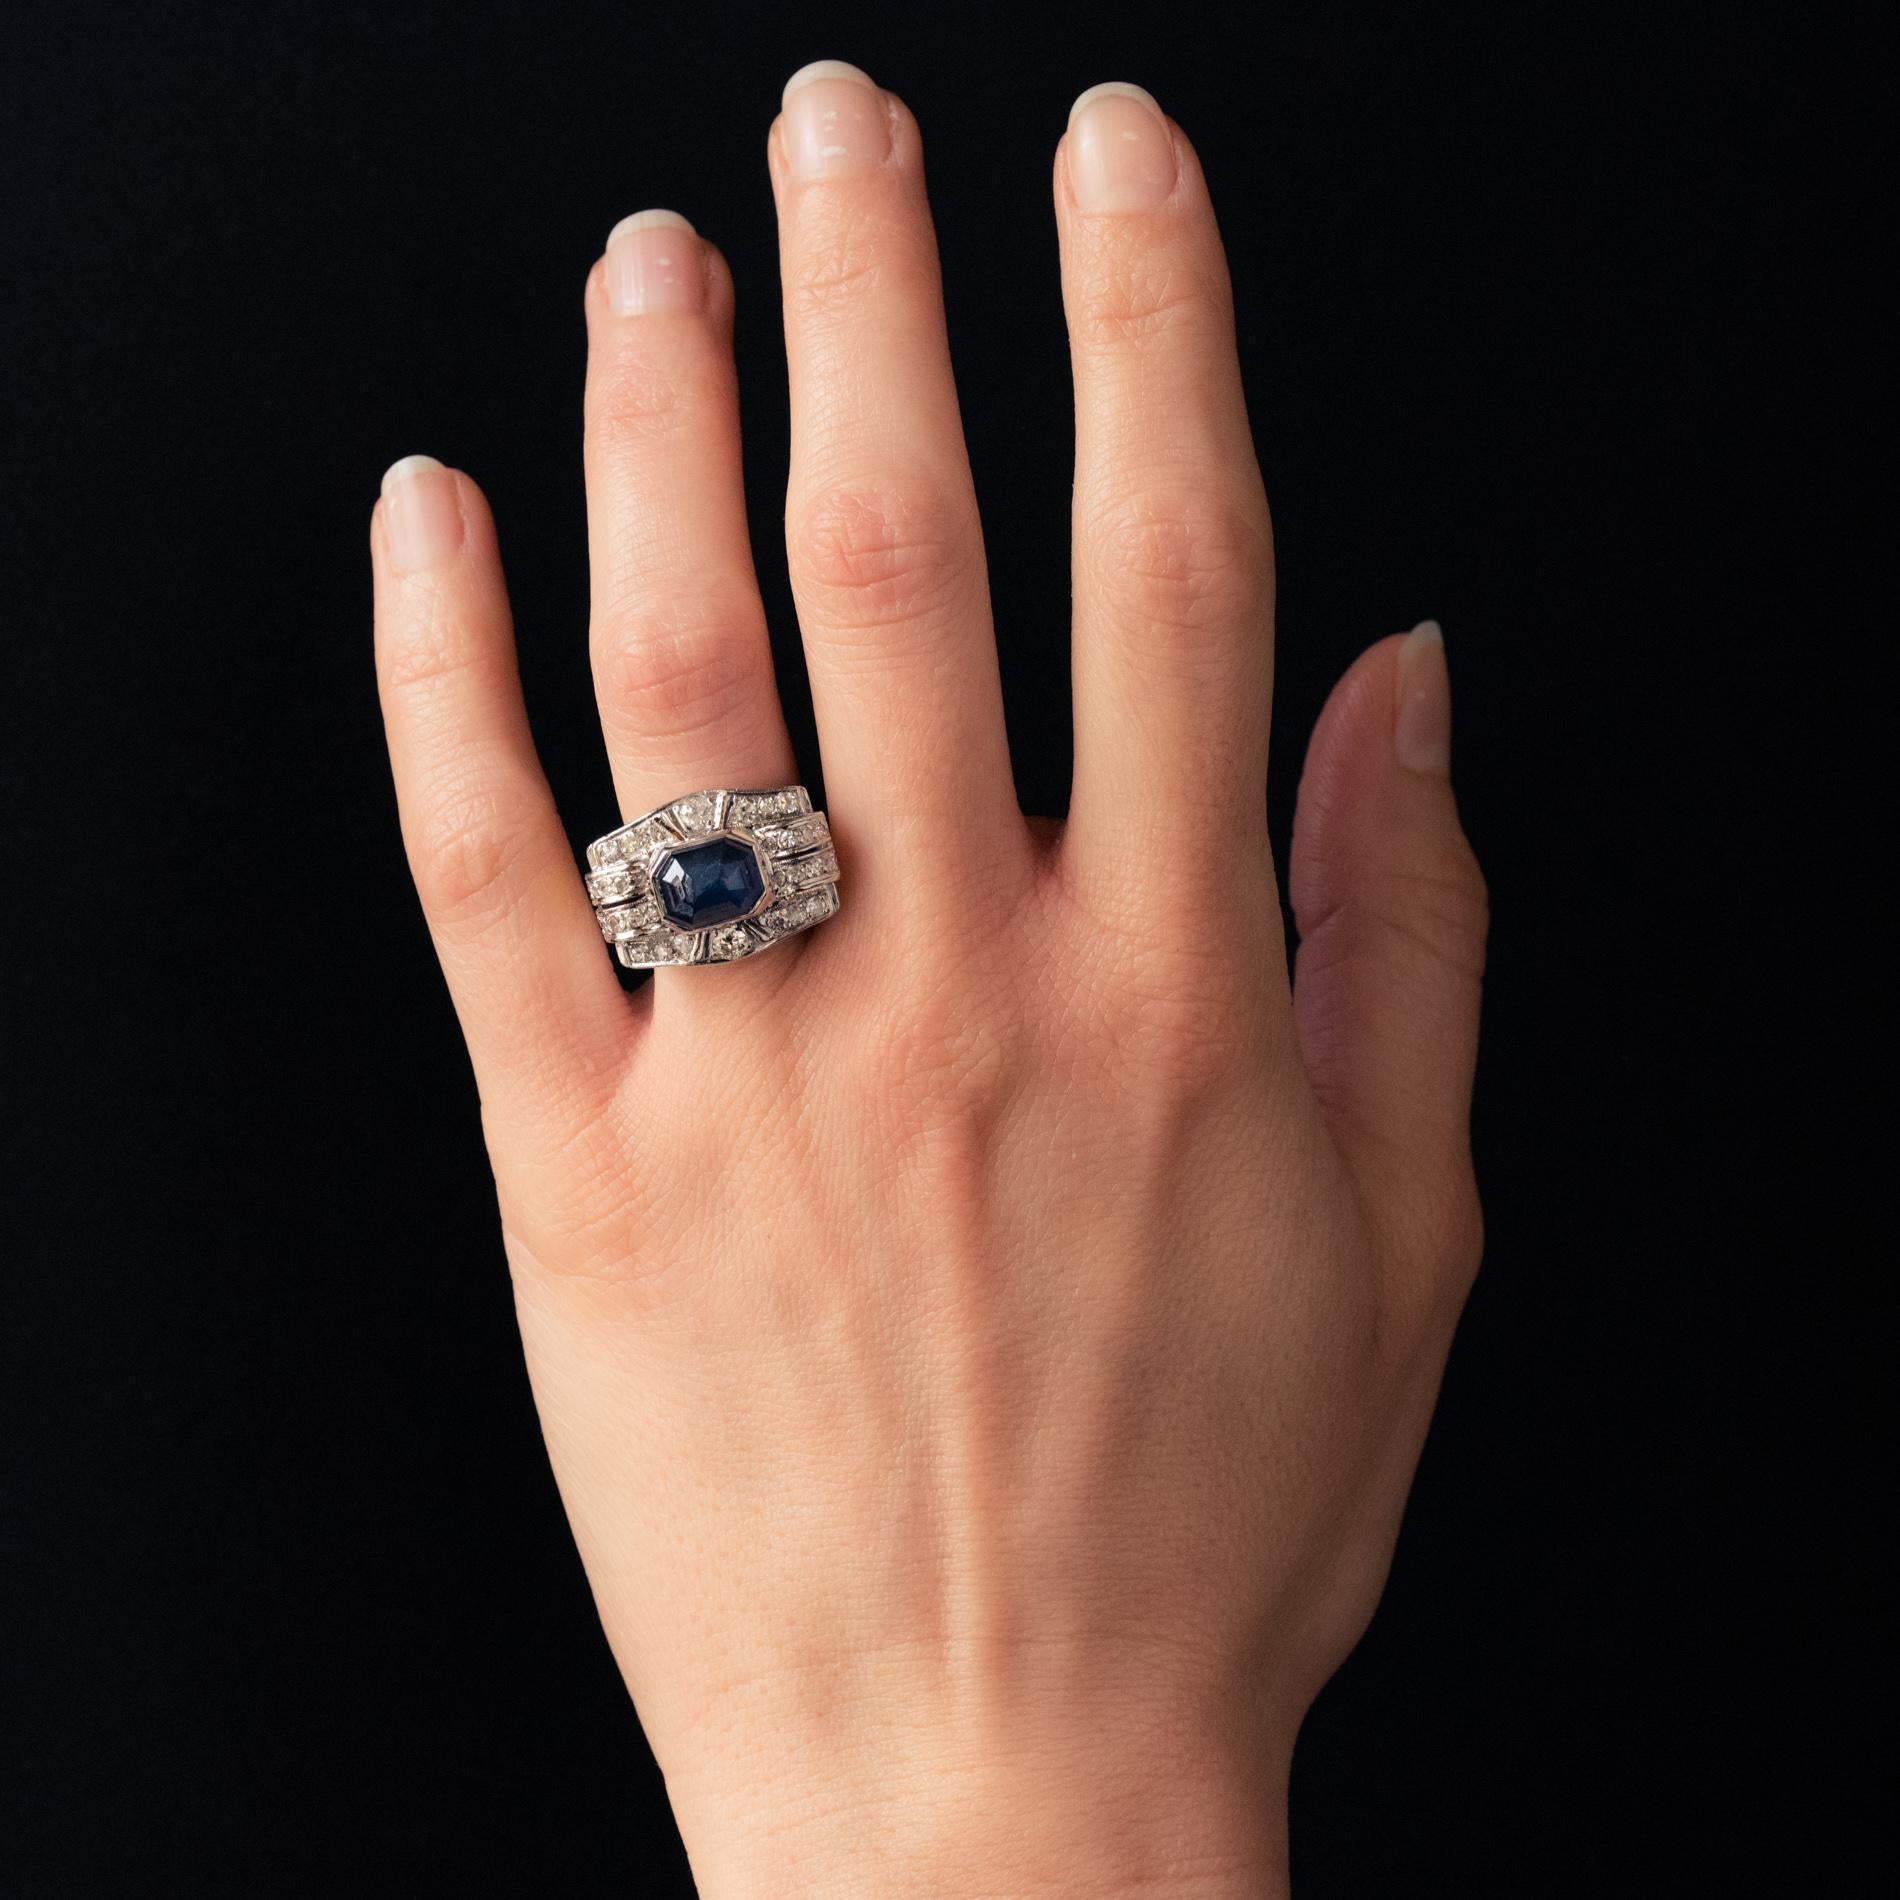 Ring in platinum, mascaron hallmark.
Rectangular and wide, this sublime art deco ring is adorned on top with a faceted rectangular- cut cabochon blue sapphire. The whole tour is paved with diamonds. The basket is perforated with geometric